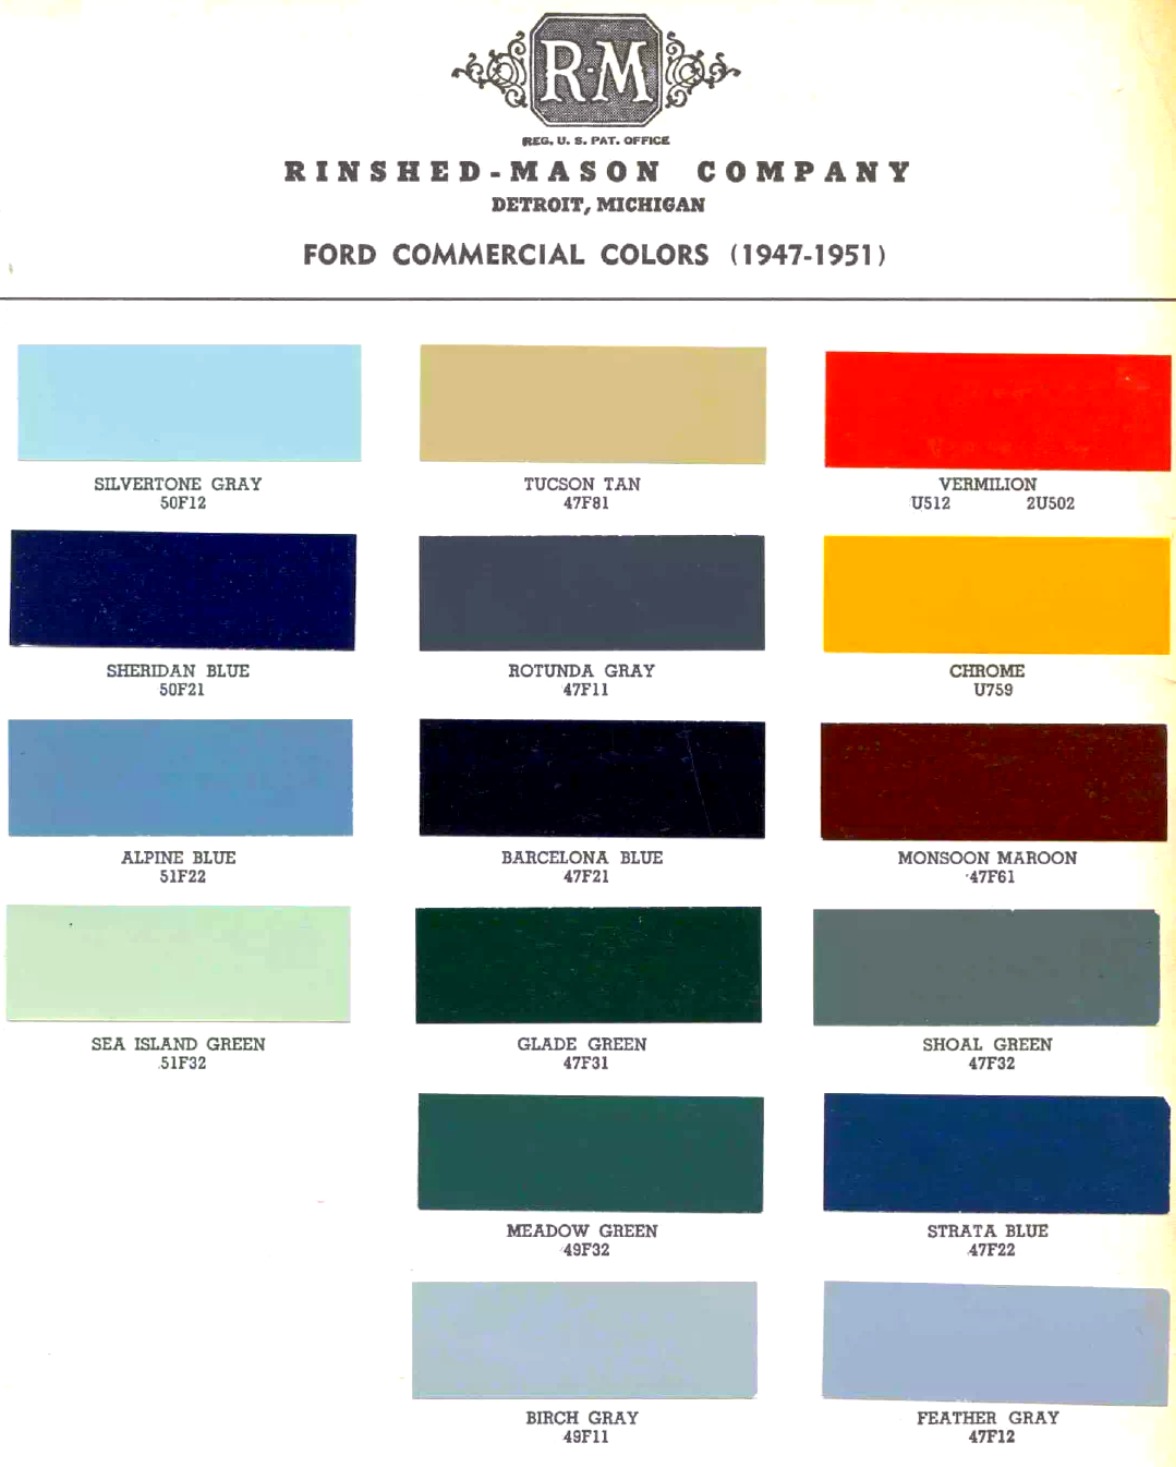 exterior colors used on ford vehicles in 1949